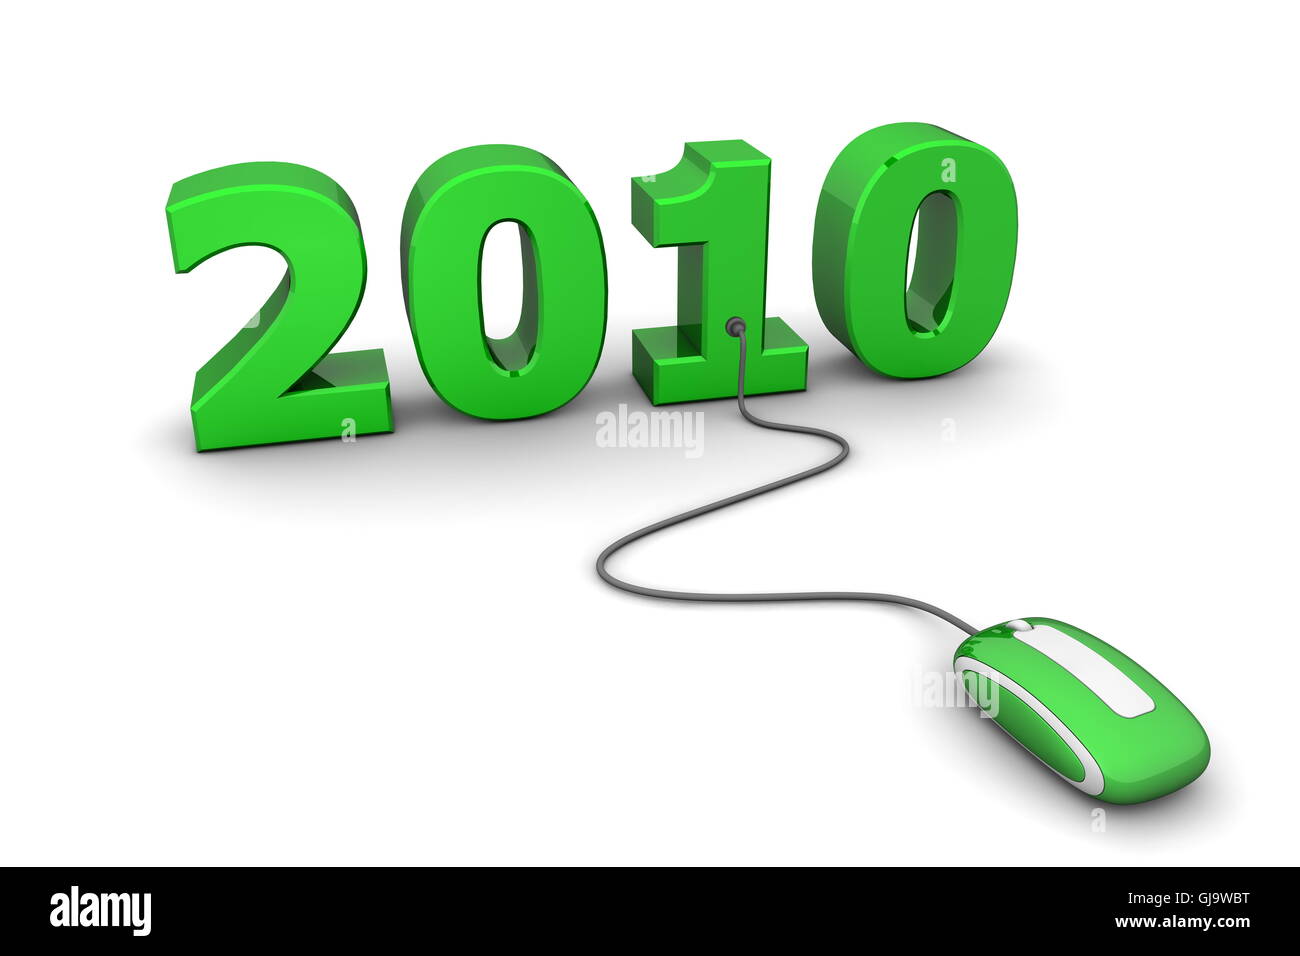 Browse the Green New Year 2010 - Green Mouse Stock Photo